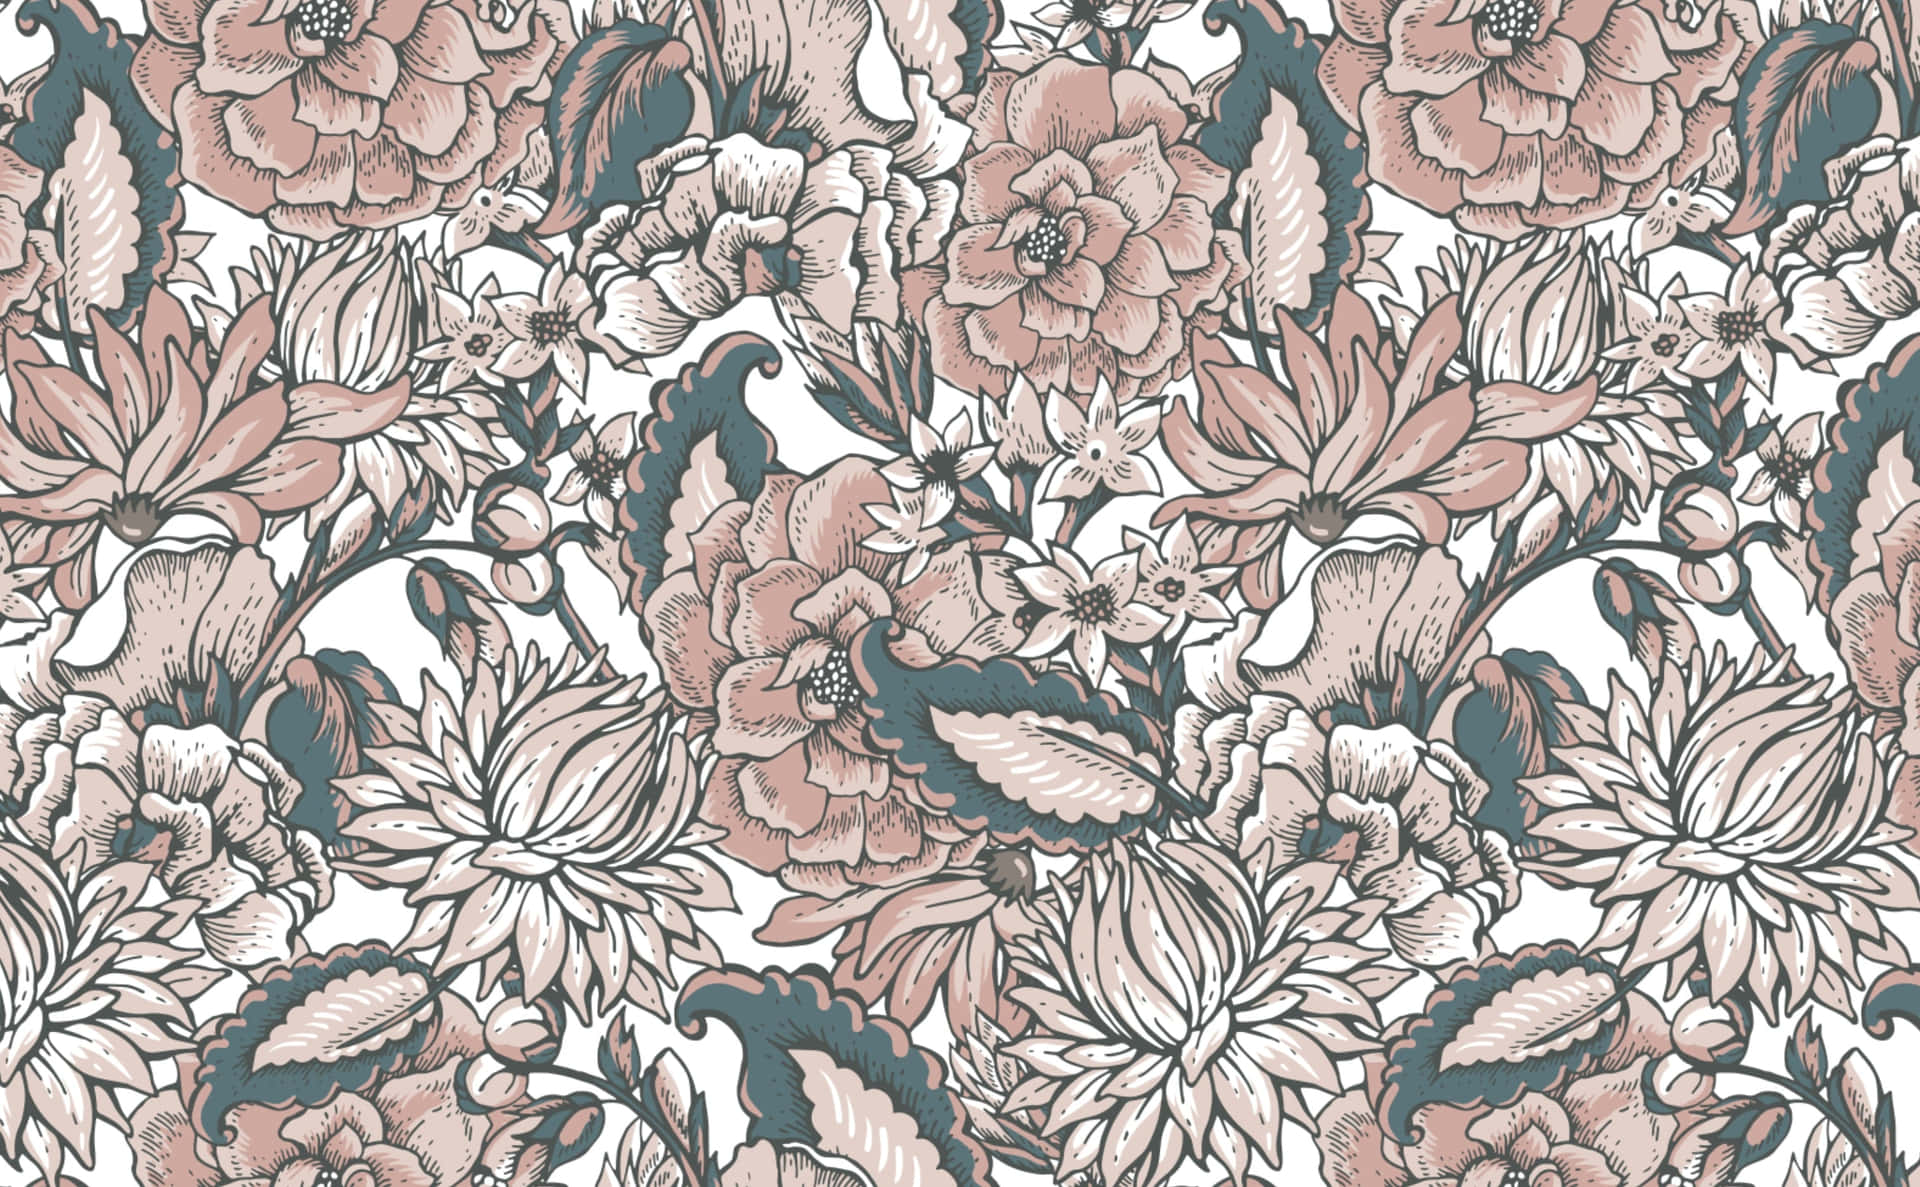 Experience the beauty of the past with this Vintage Floral background